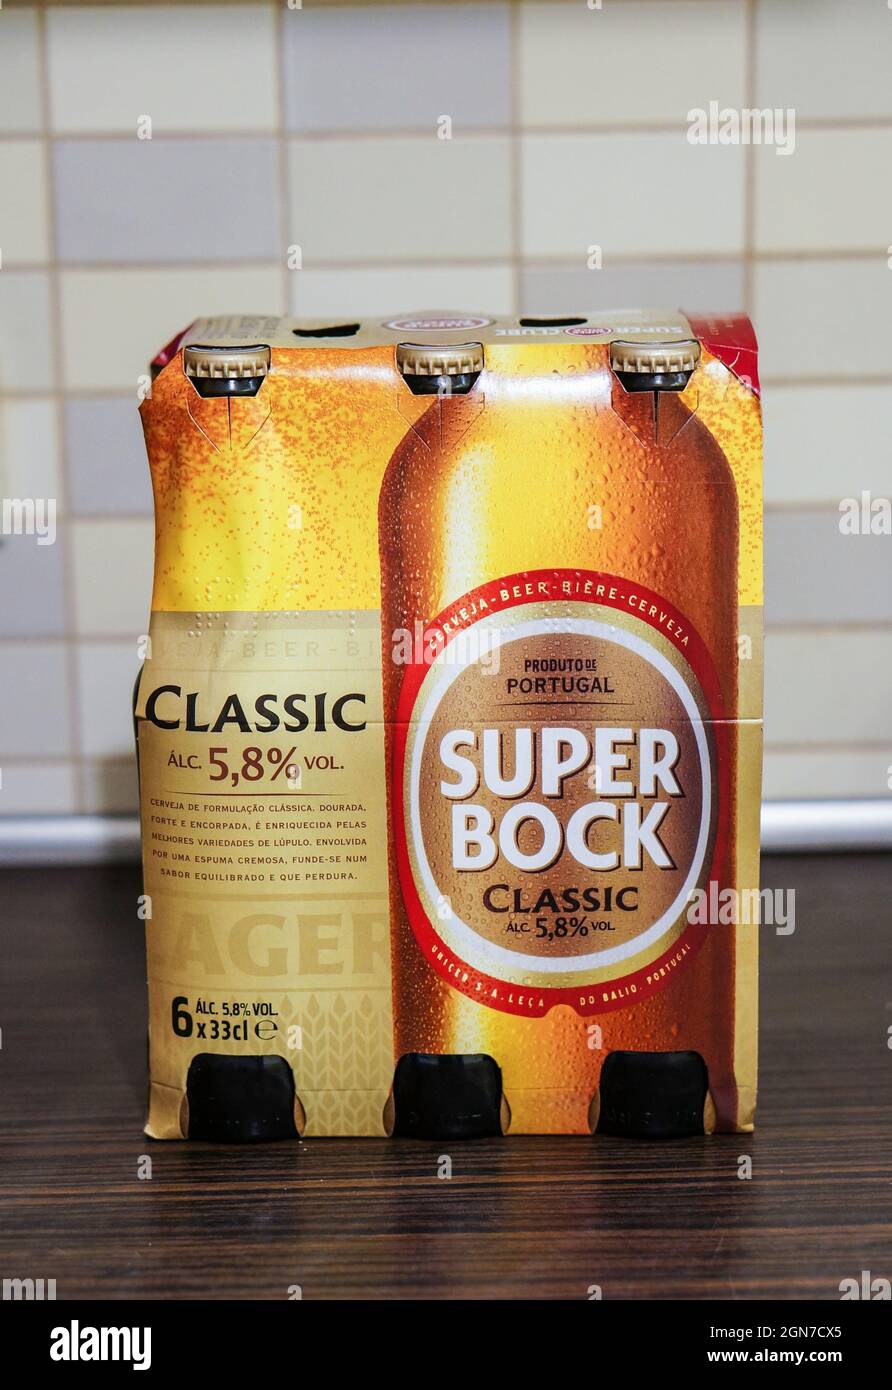 POZNAN, POLAND - Jun 23, 2016: A Super Bock Classic six pack beer in bottle  Stock Photo - Alamy